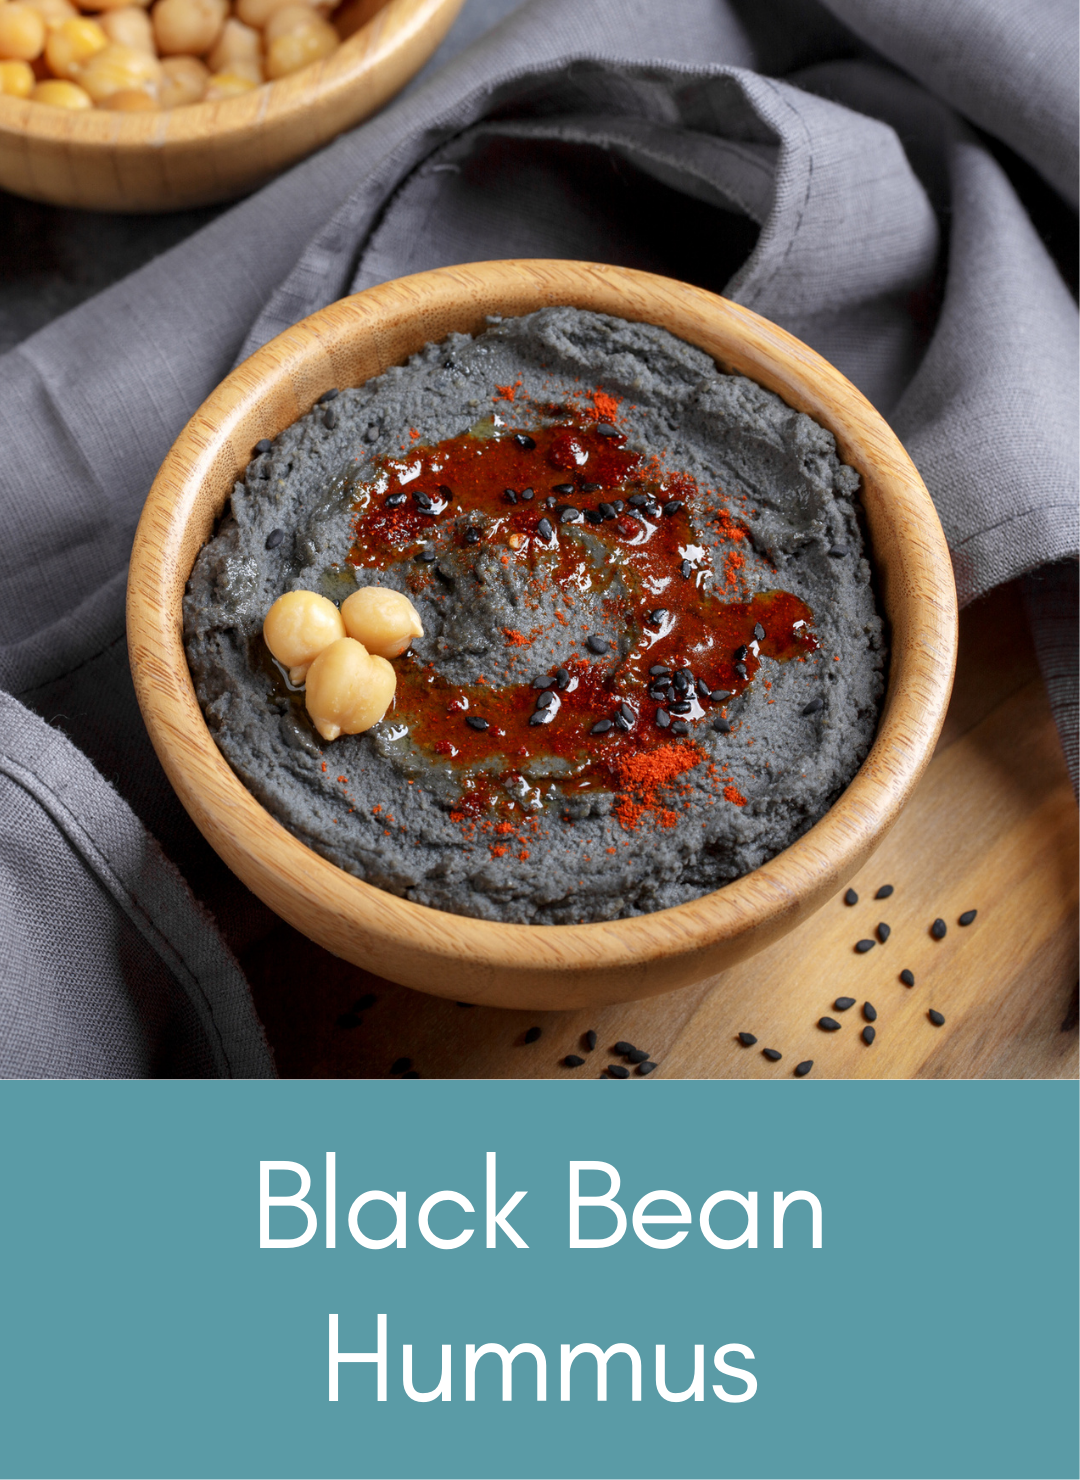 Whole food plant based vegan black bean hummus Picture with link to recipe